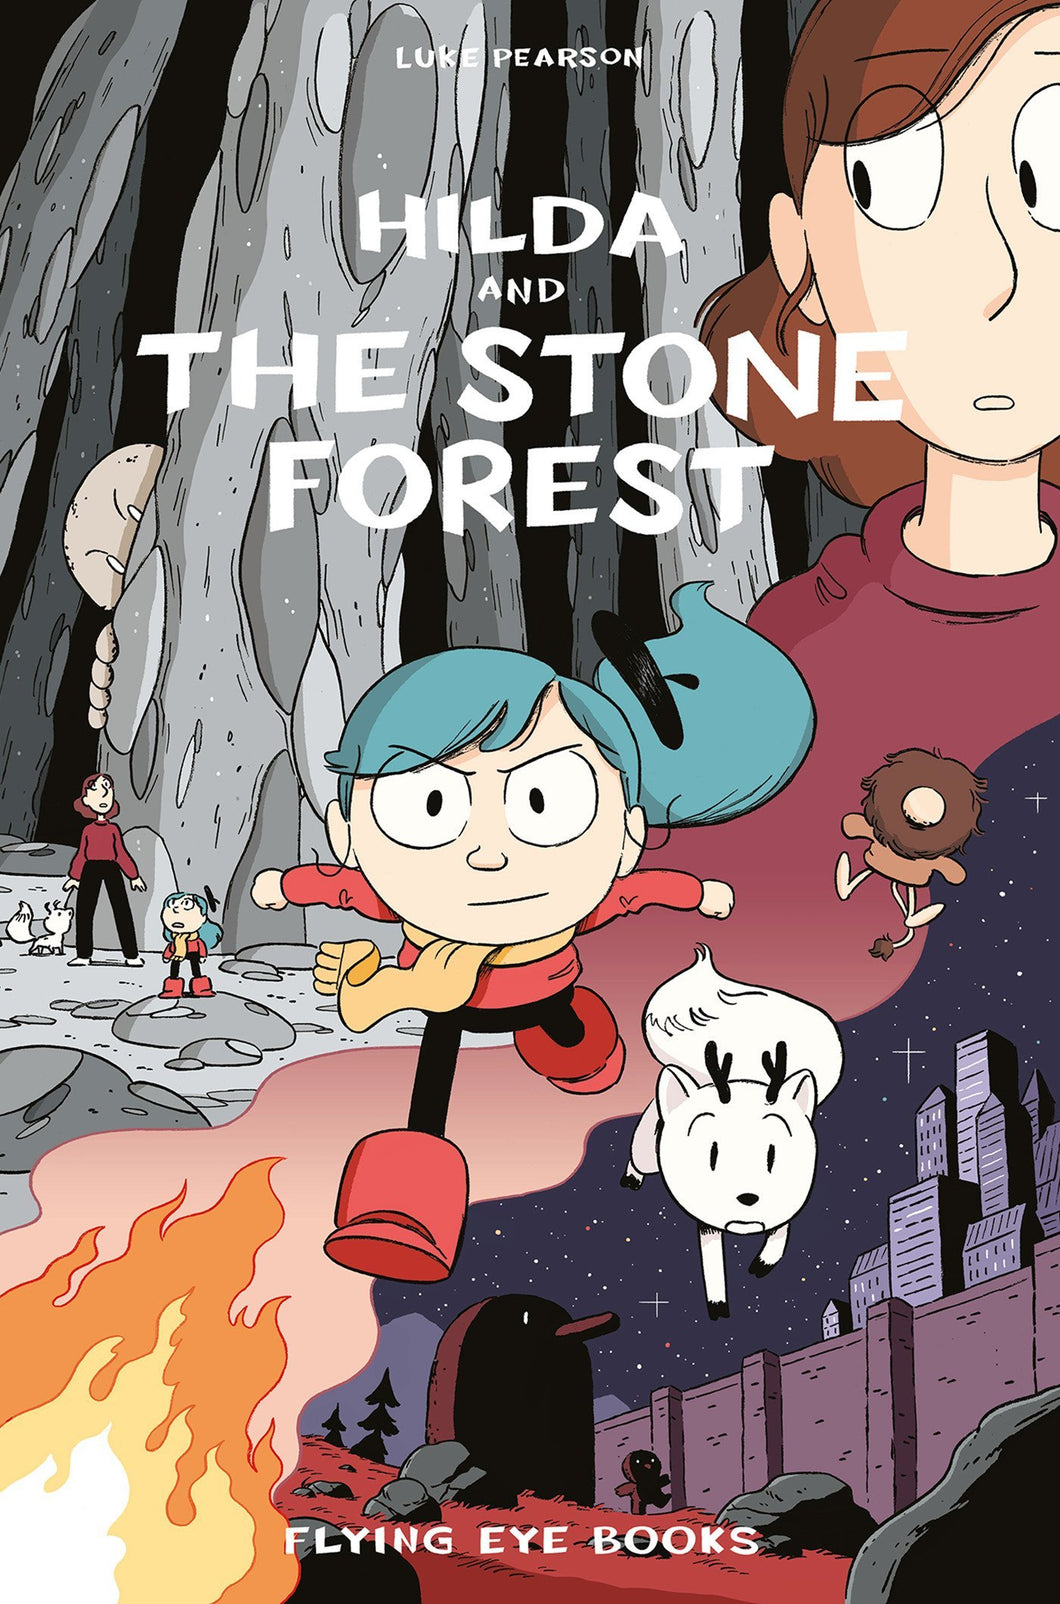 Hilda and the Stone Forest by by Luke Pearson